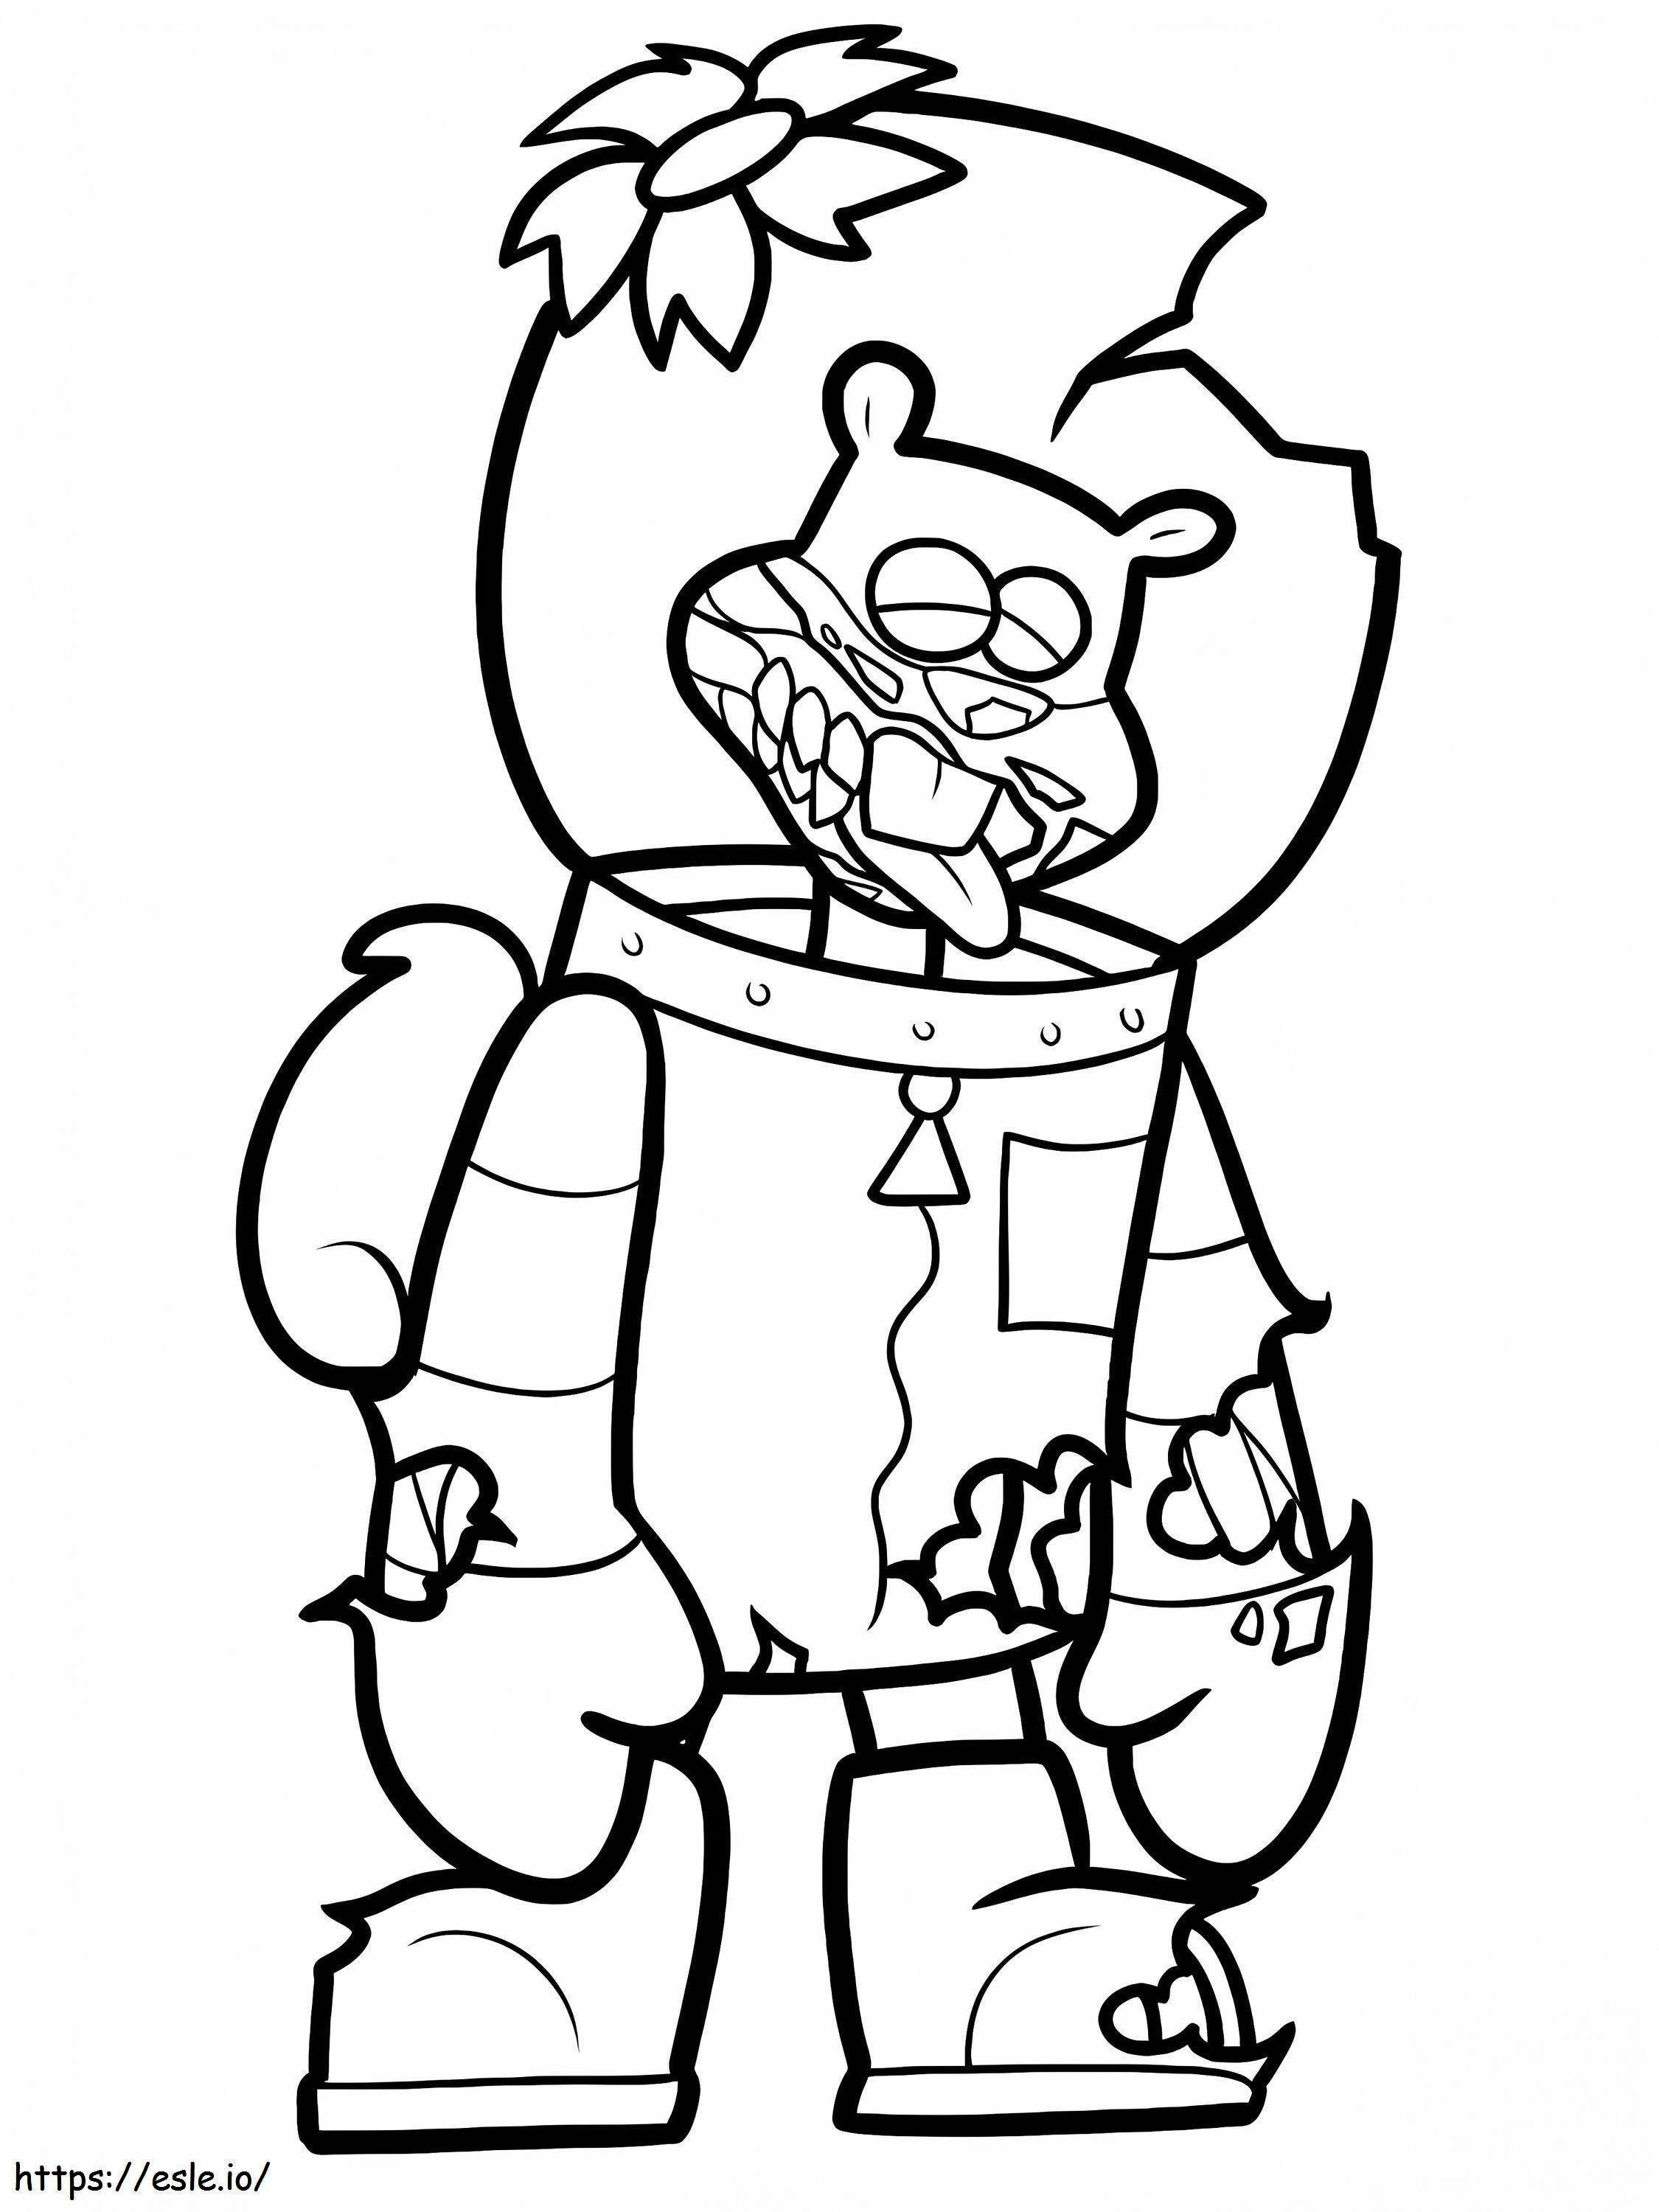 Zombie Sandy Cheeks coloring page